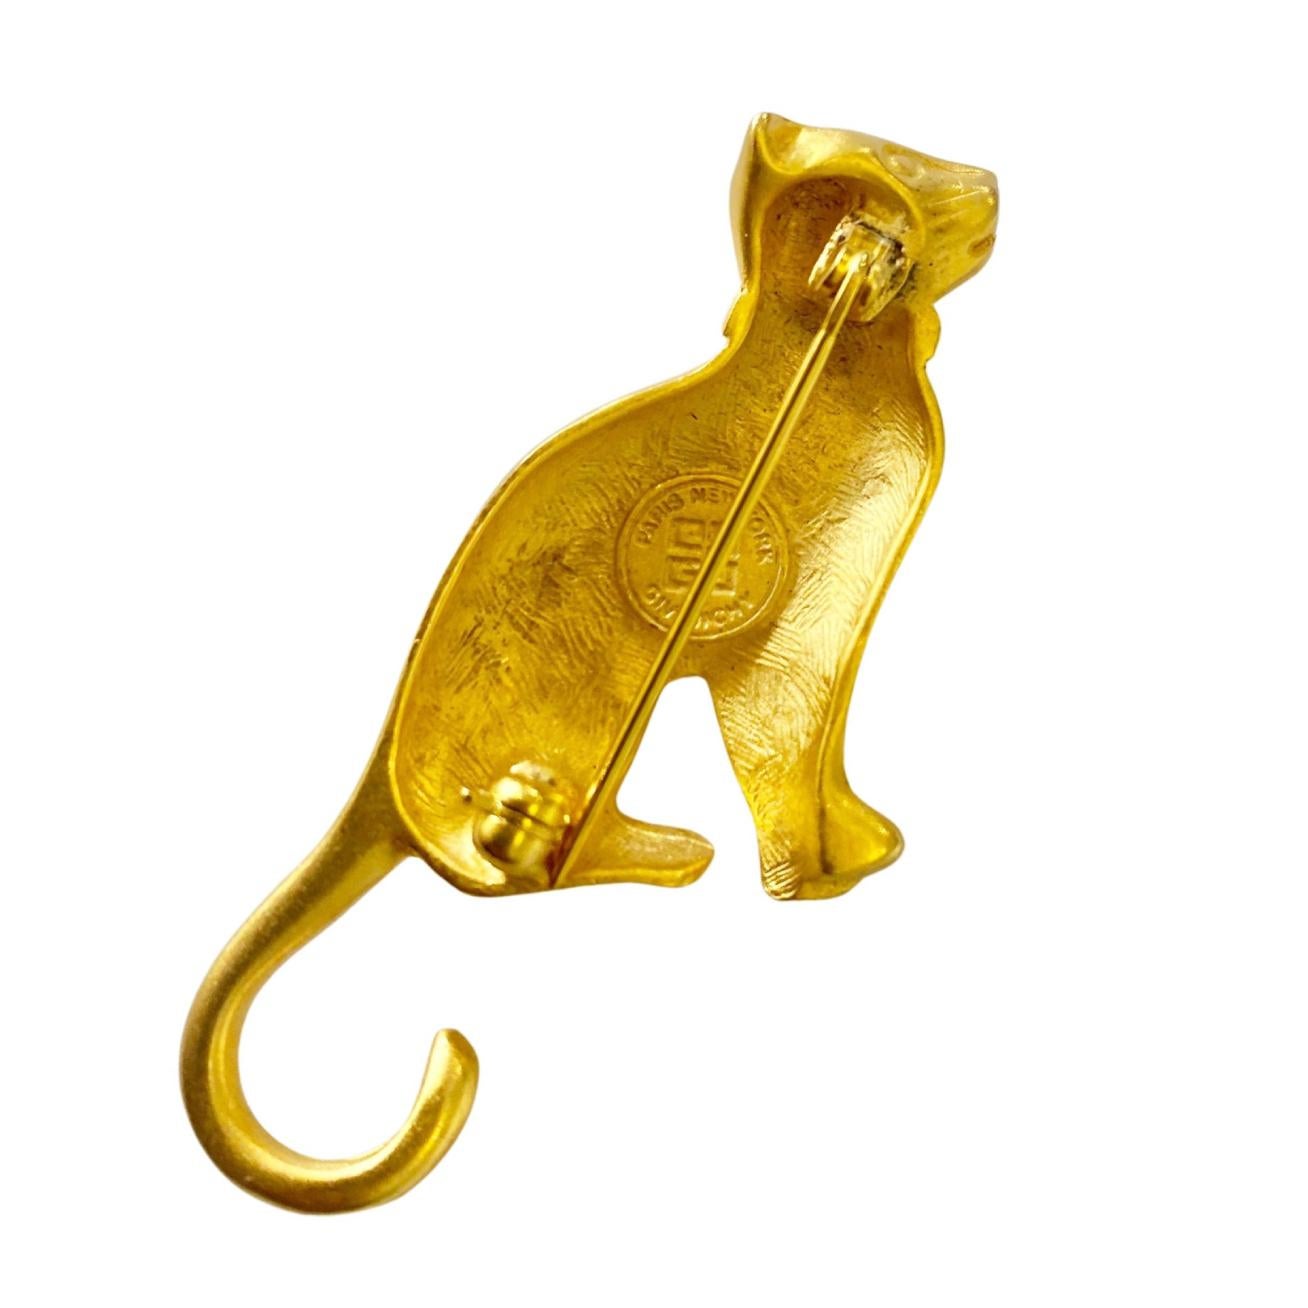 Opulence and glamour of the 1980s with this exquisite Gold Tone Metal Cat Brooch from Givenchy. Paris New York. This iconic brooch embodies the luxurious spirit of the '80s, evoking the elegance and extravagance of that era. An exquisite addition to